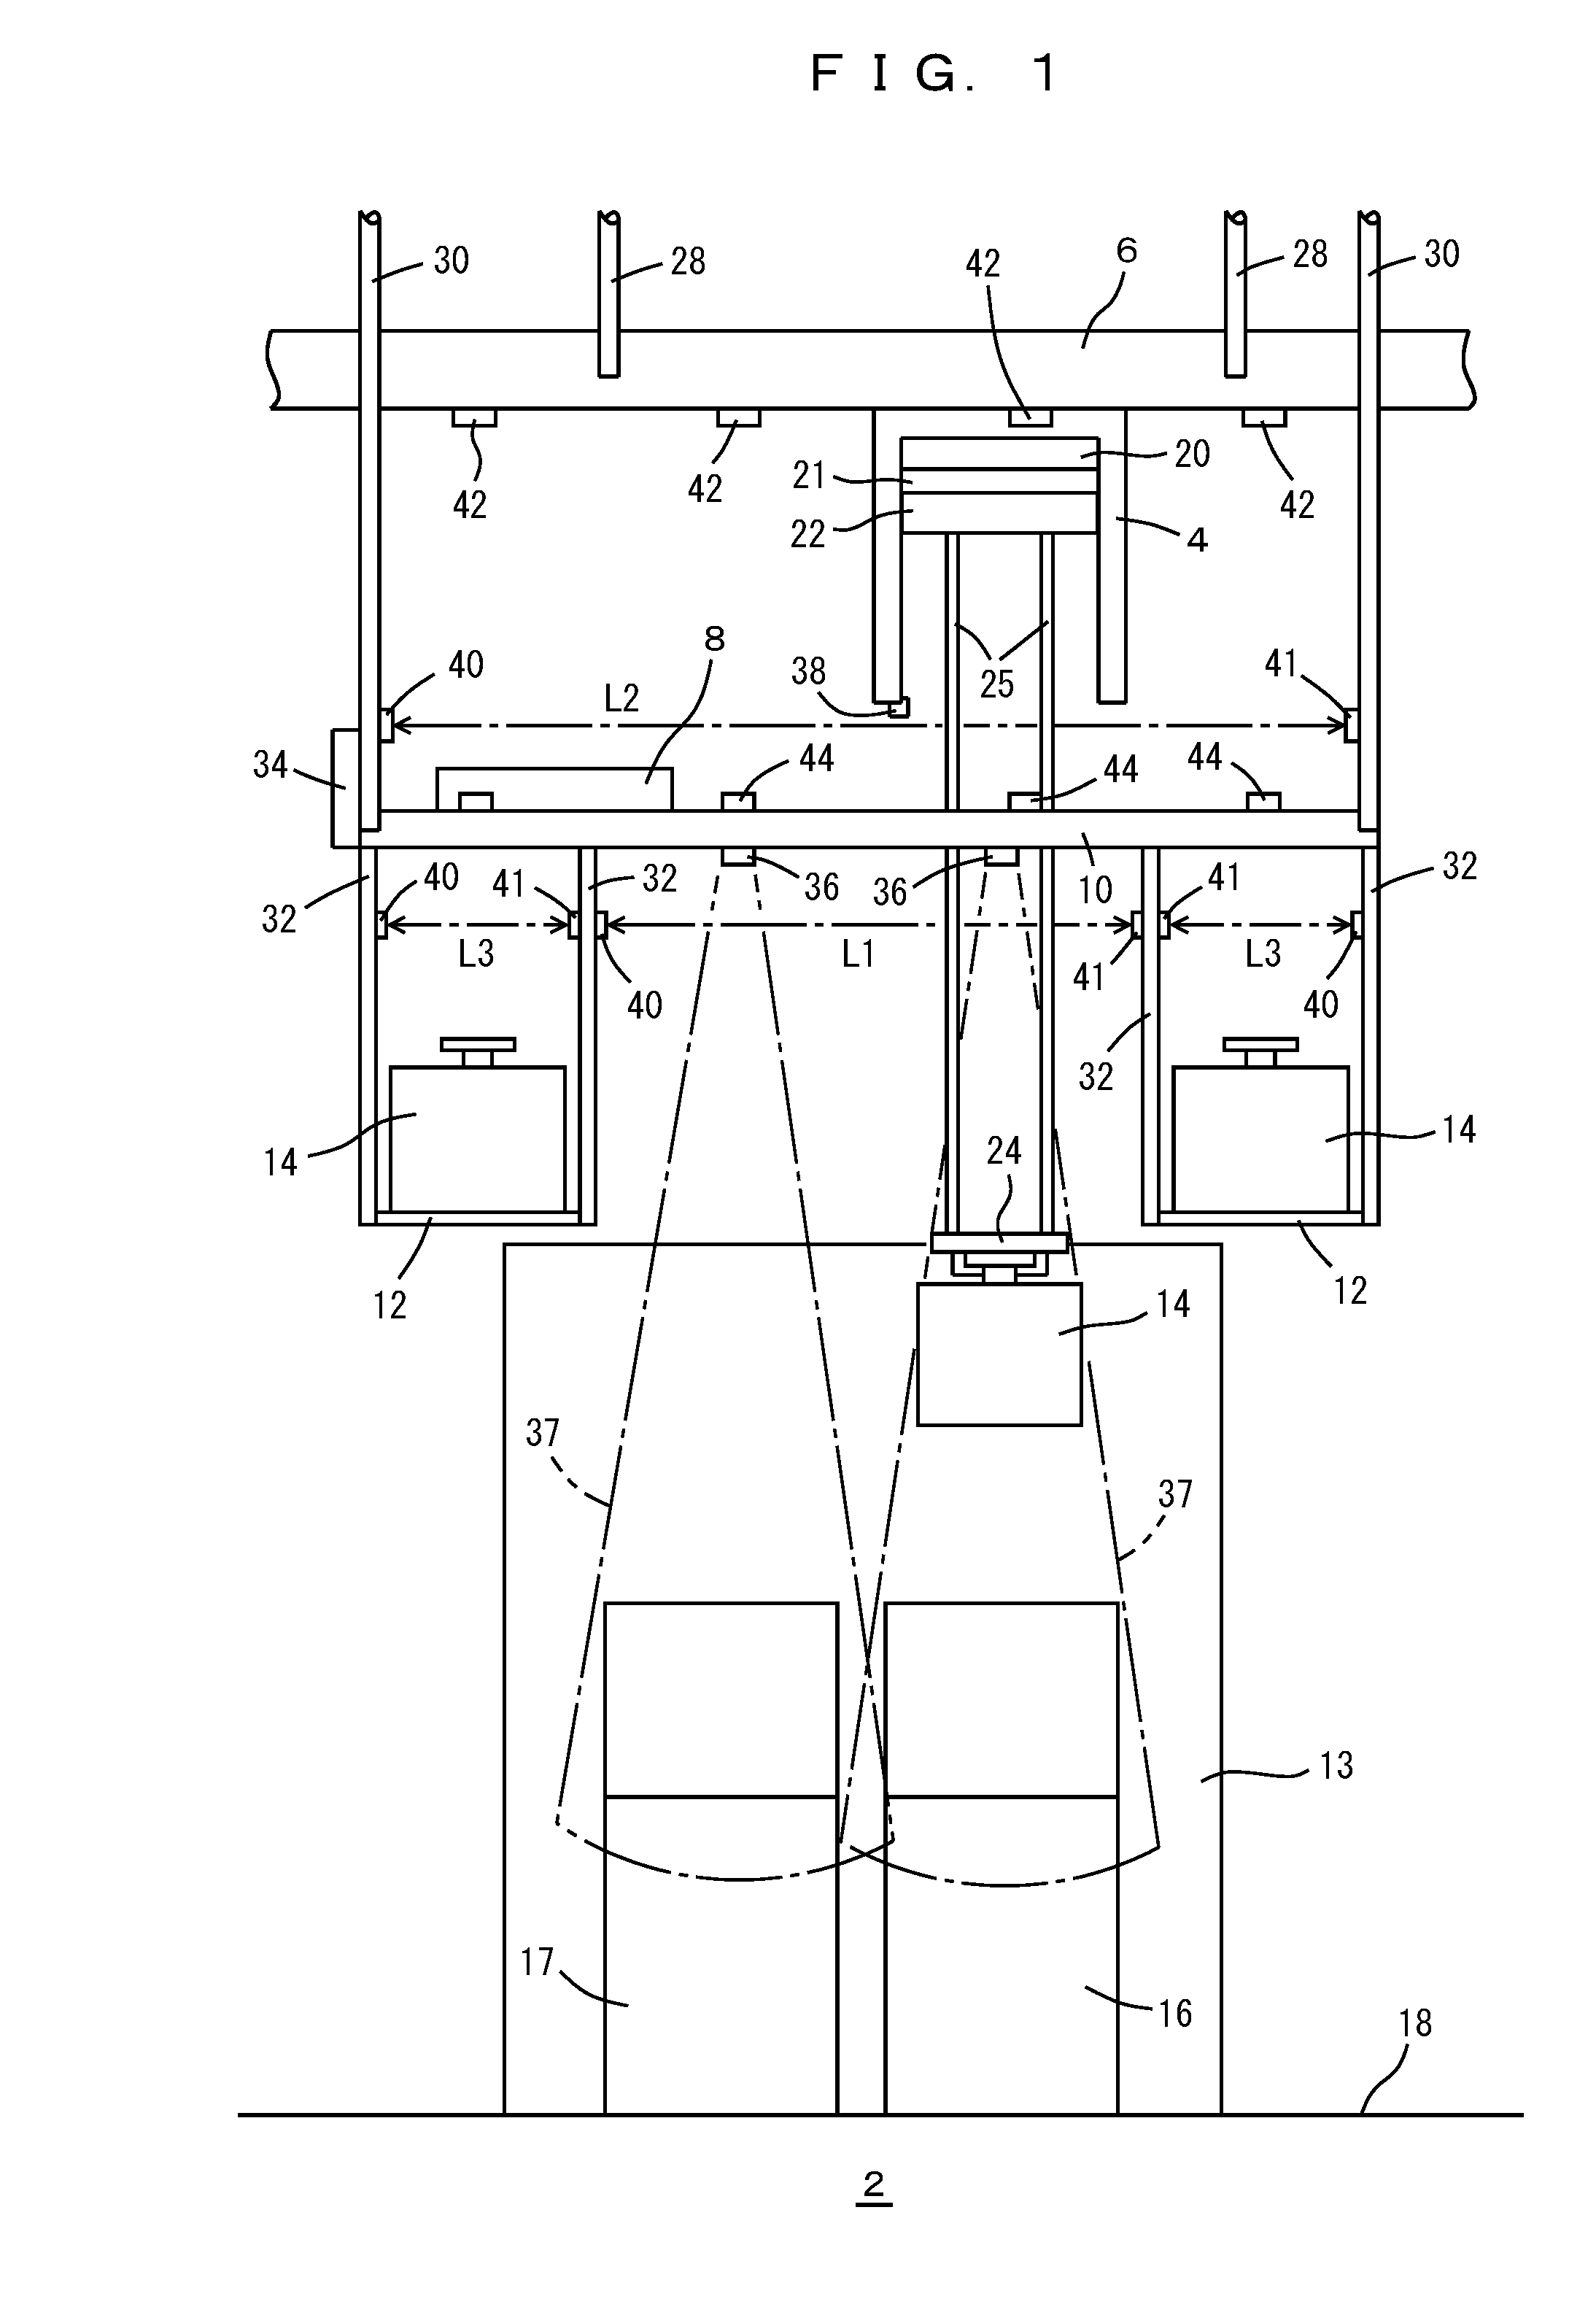 Overhead traveling vehicle system and control method for overhead traveling vehicle system